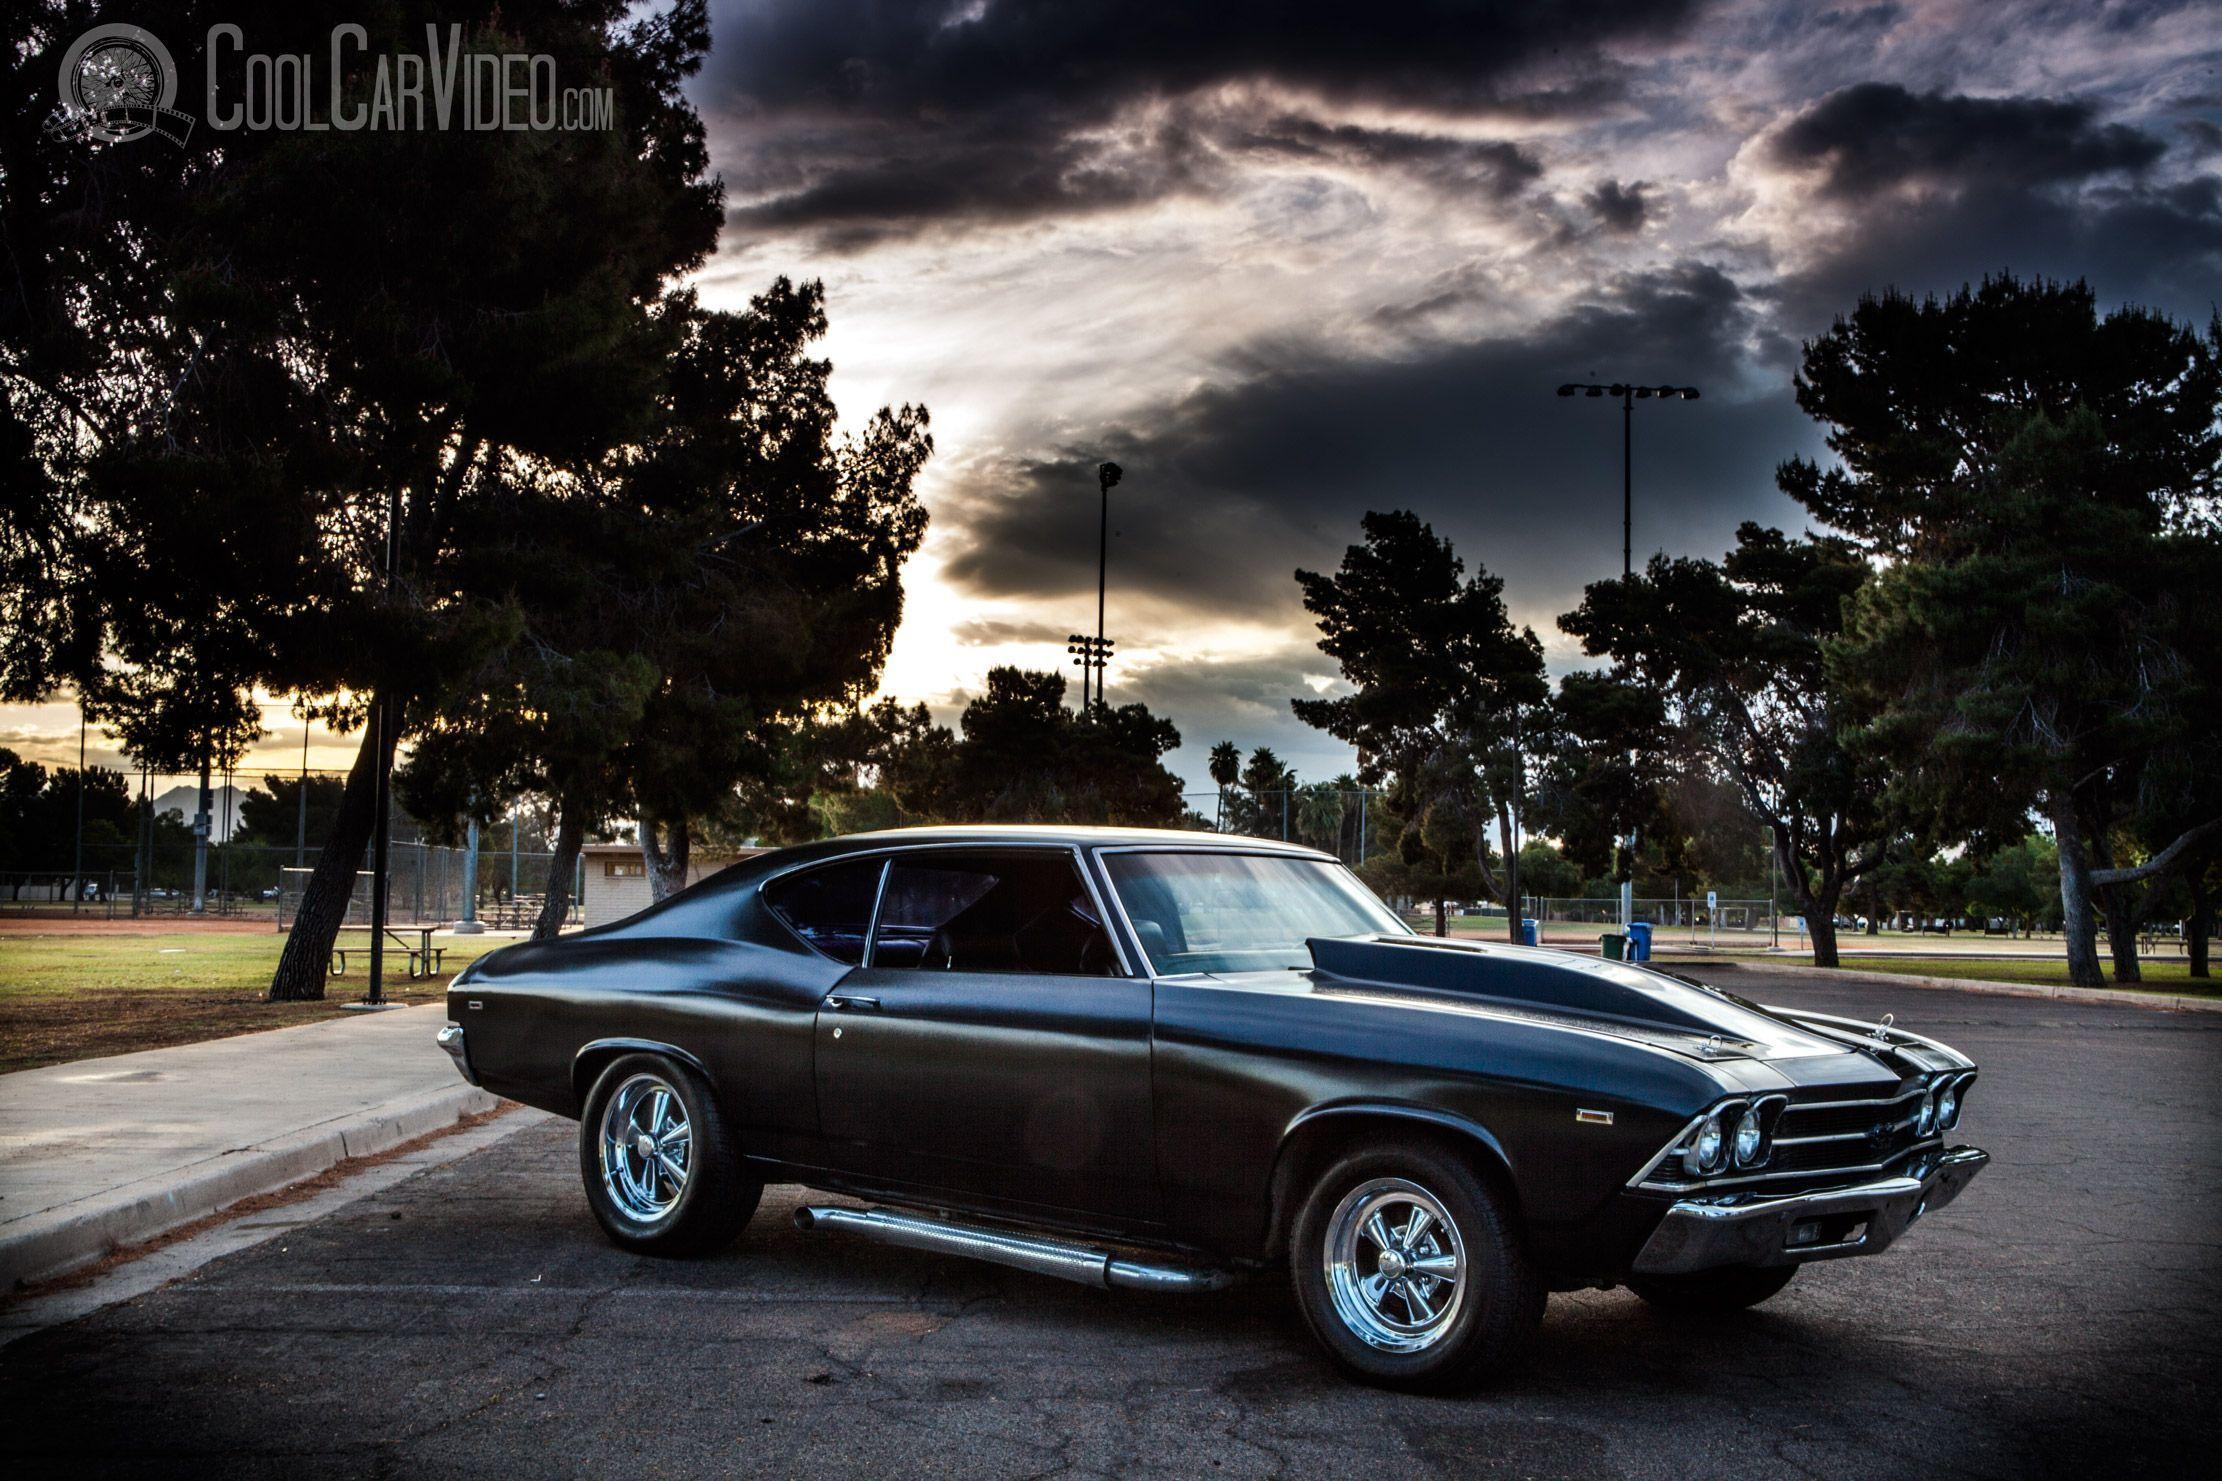 Chevelle Wallpapers